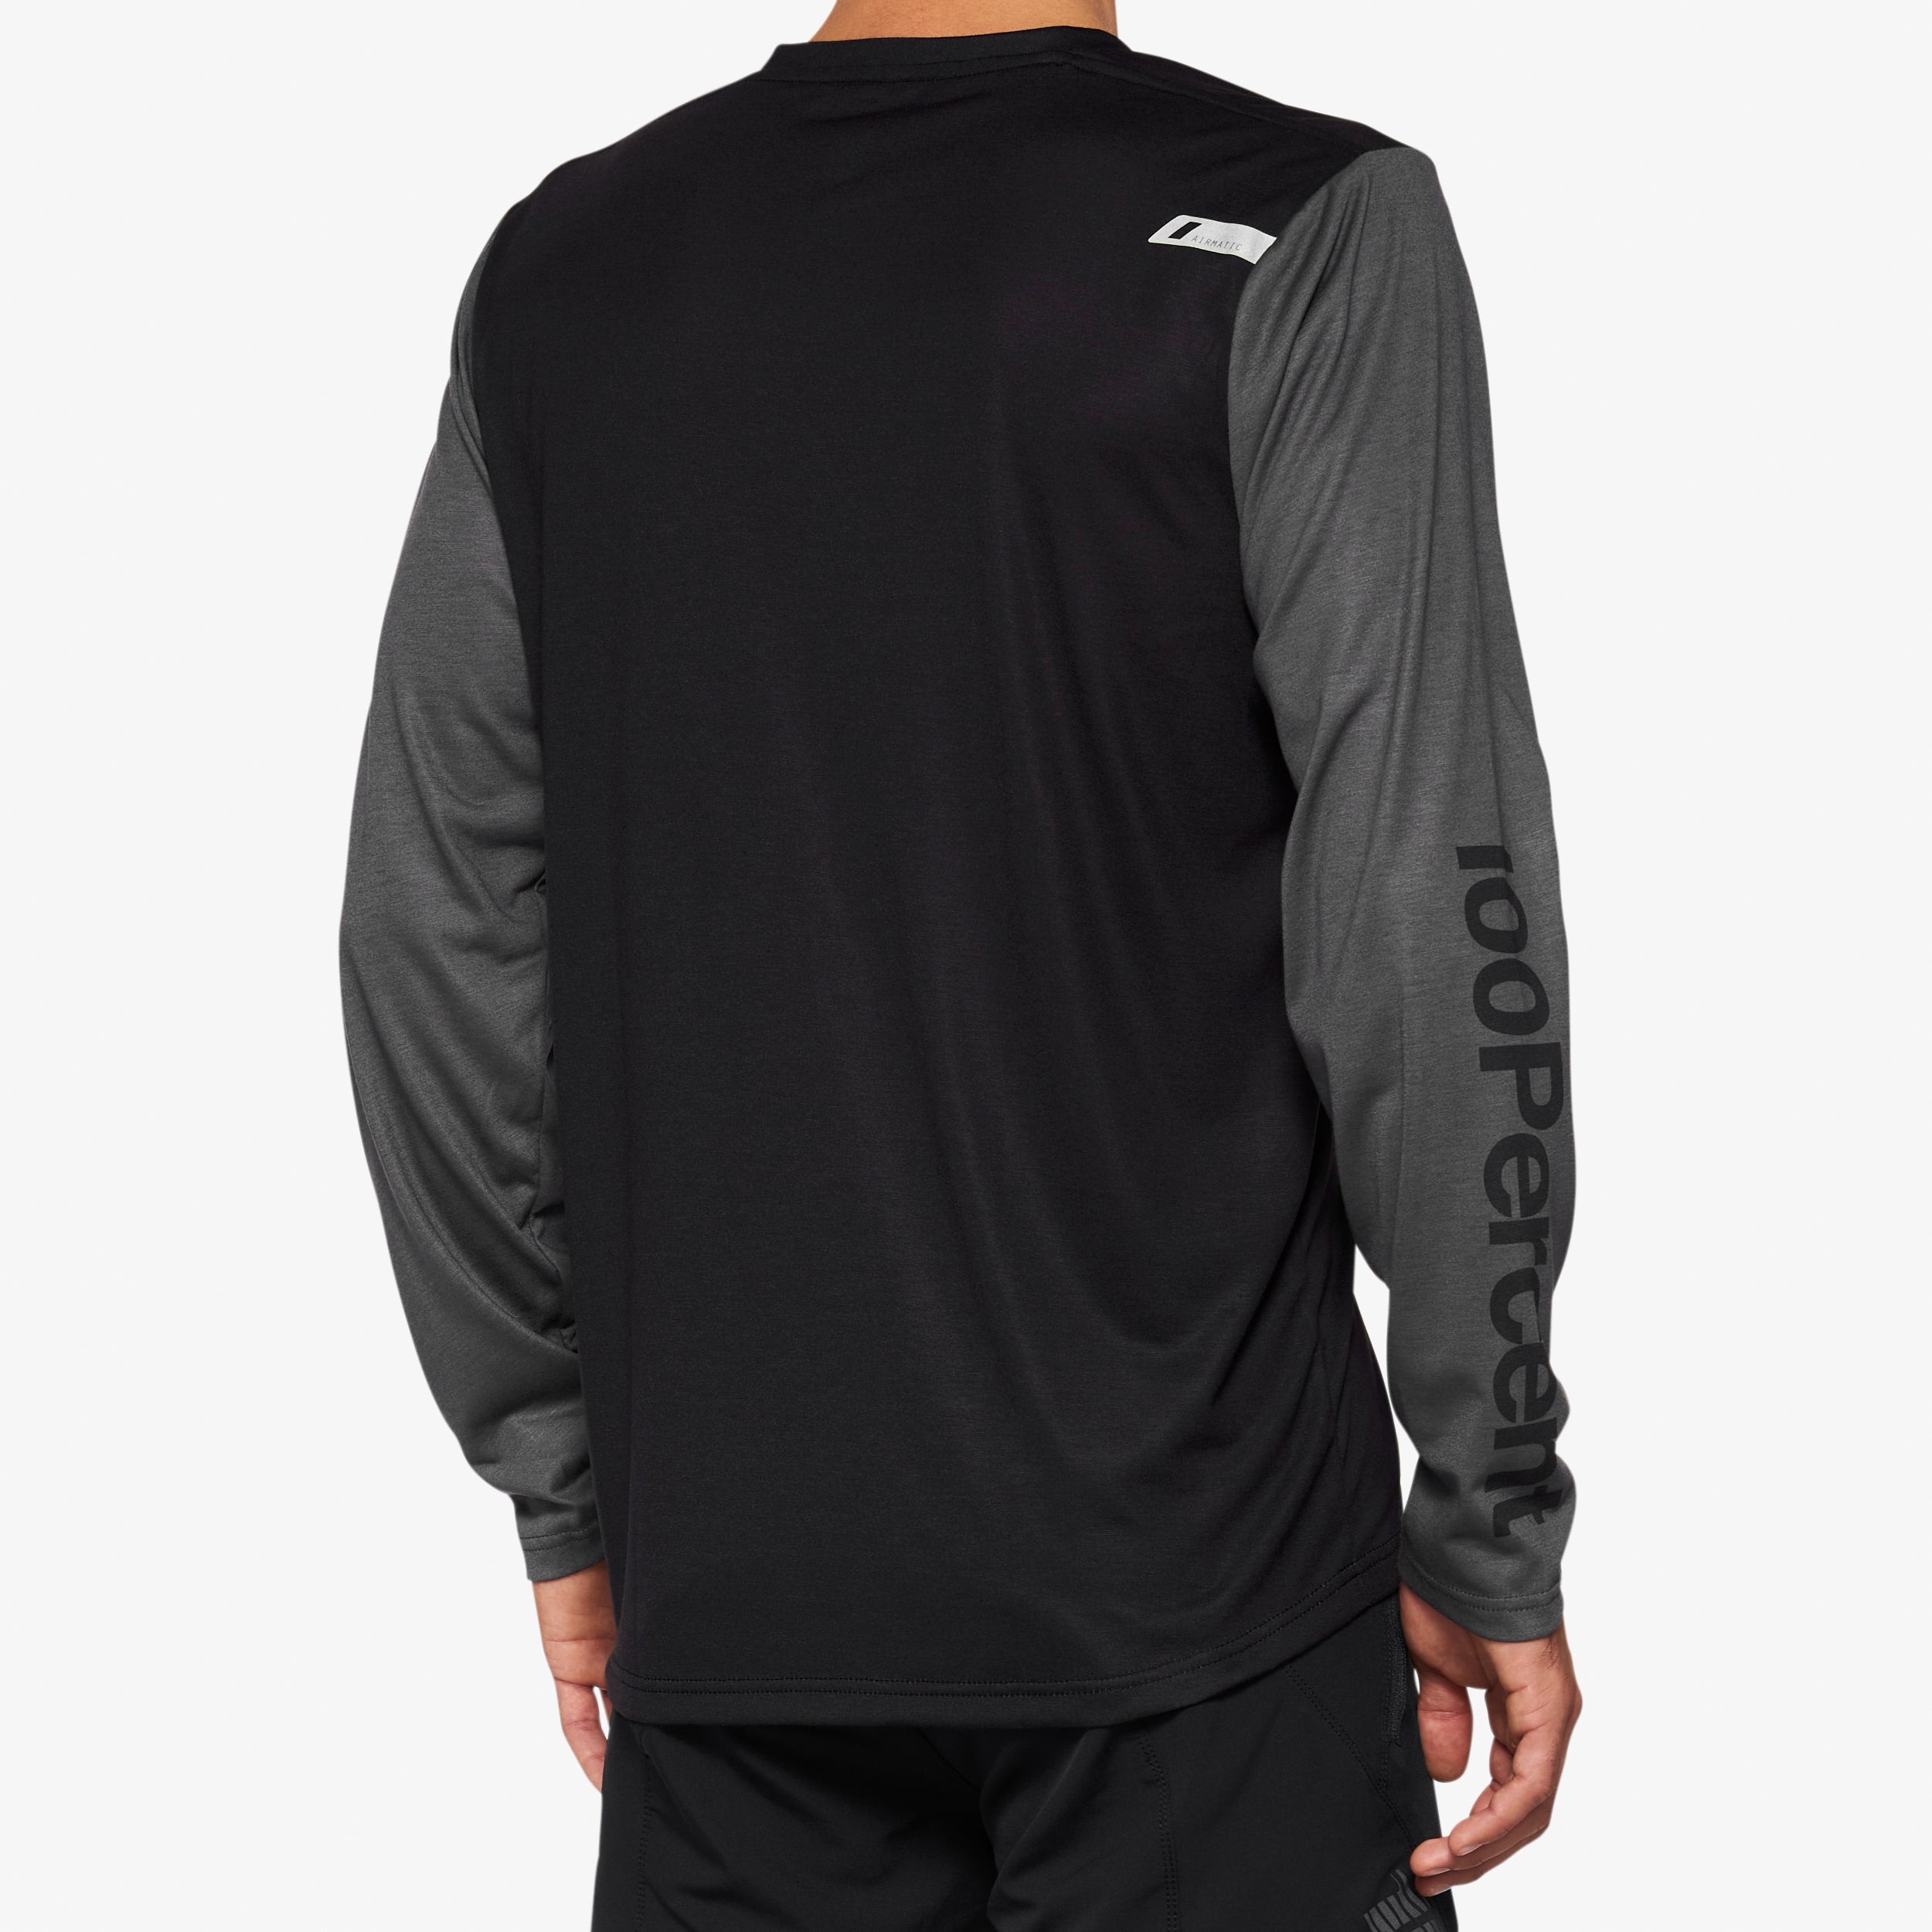 AIRMATIC Long Sleeve Jersey Black - Secondary